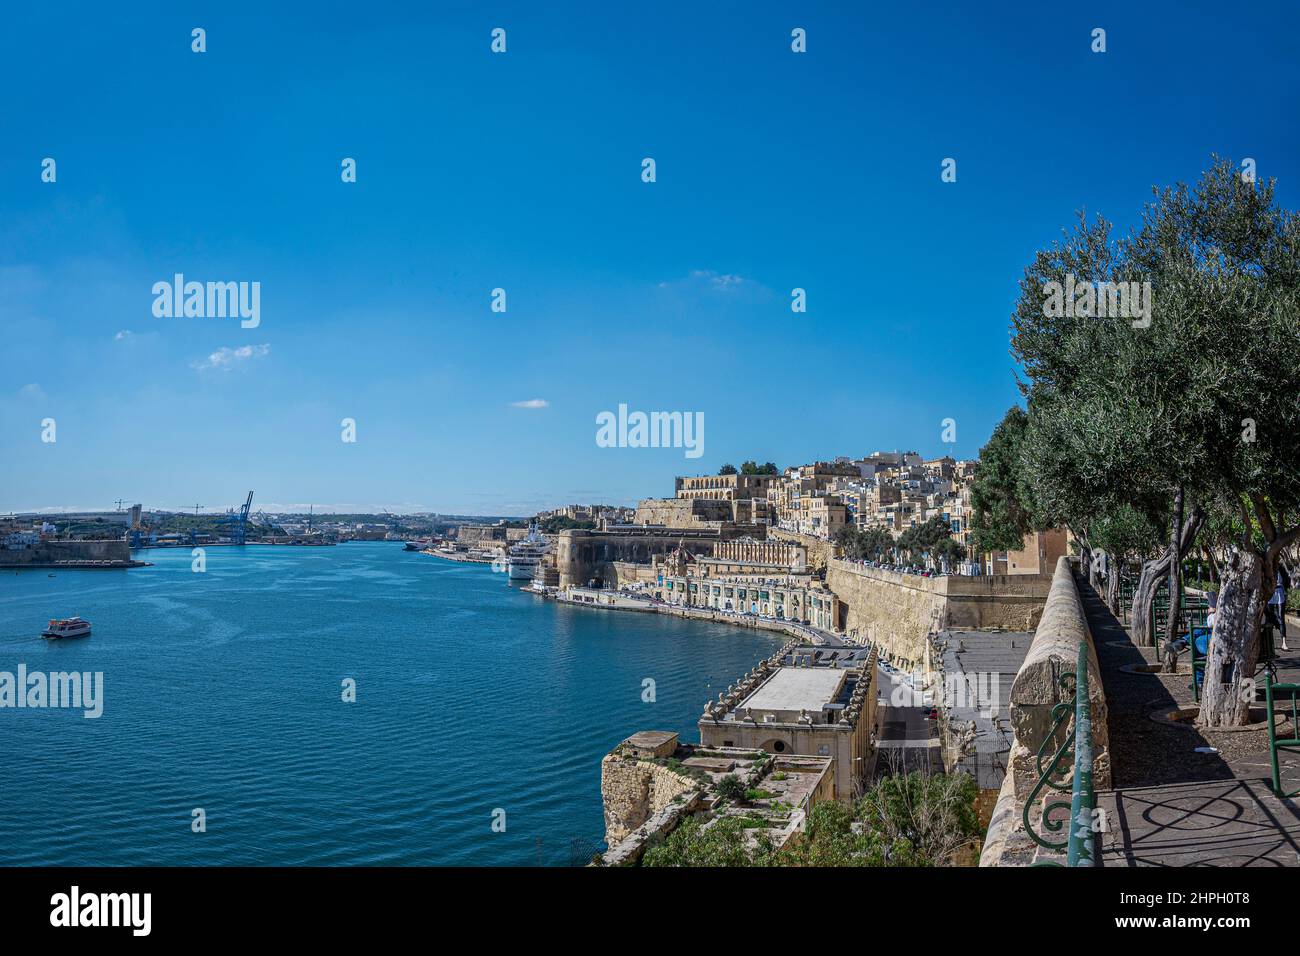 Panoramic view of city wall and harbor in Valletta, Malta. Stock Photo